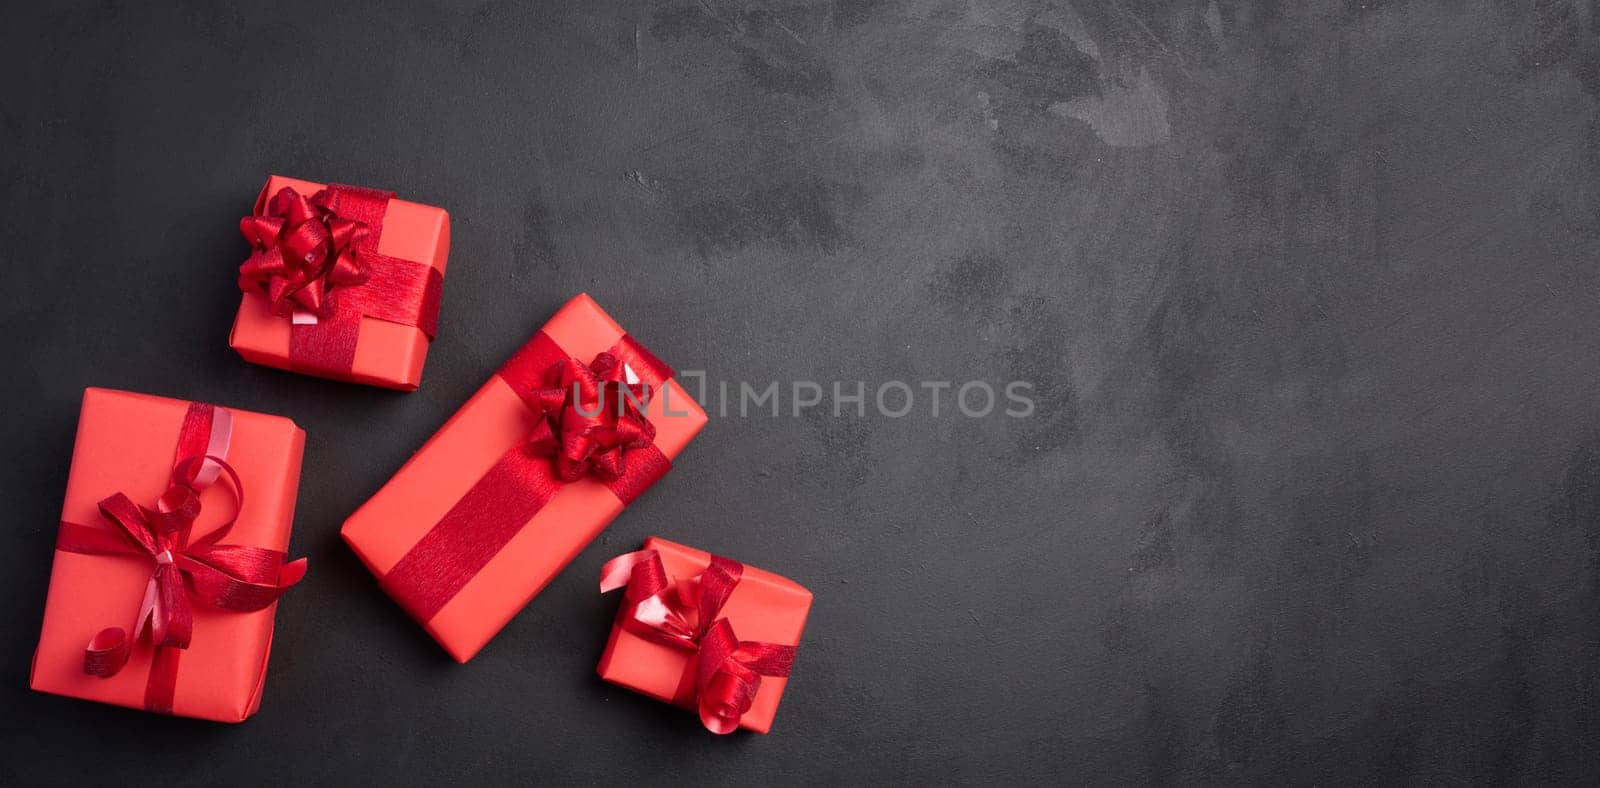 Boxes packed in red paper and tied with ribbon on a black background, gifts. Copy space